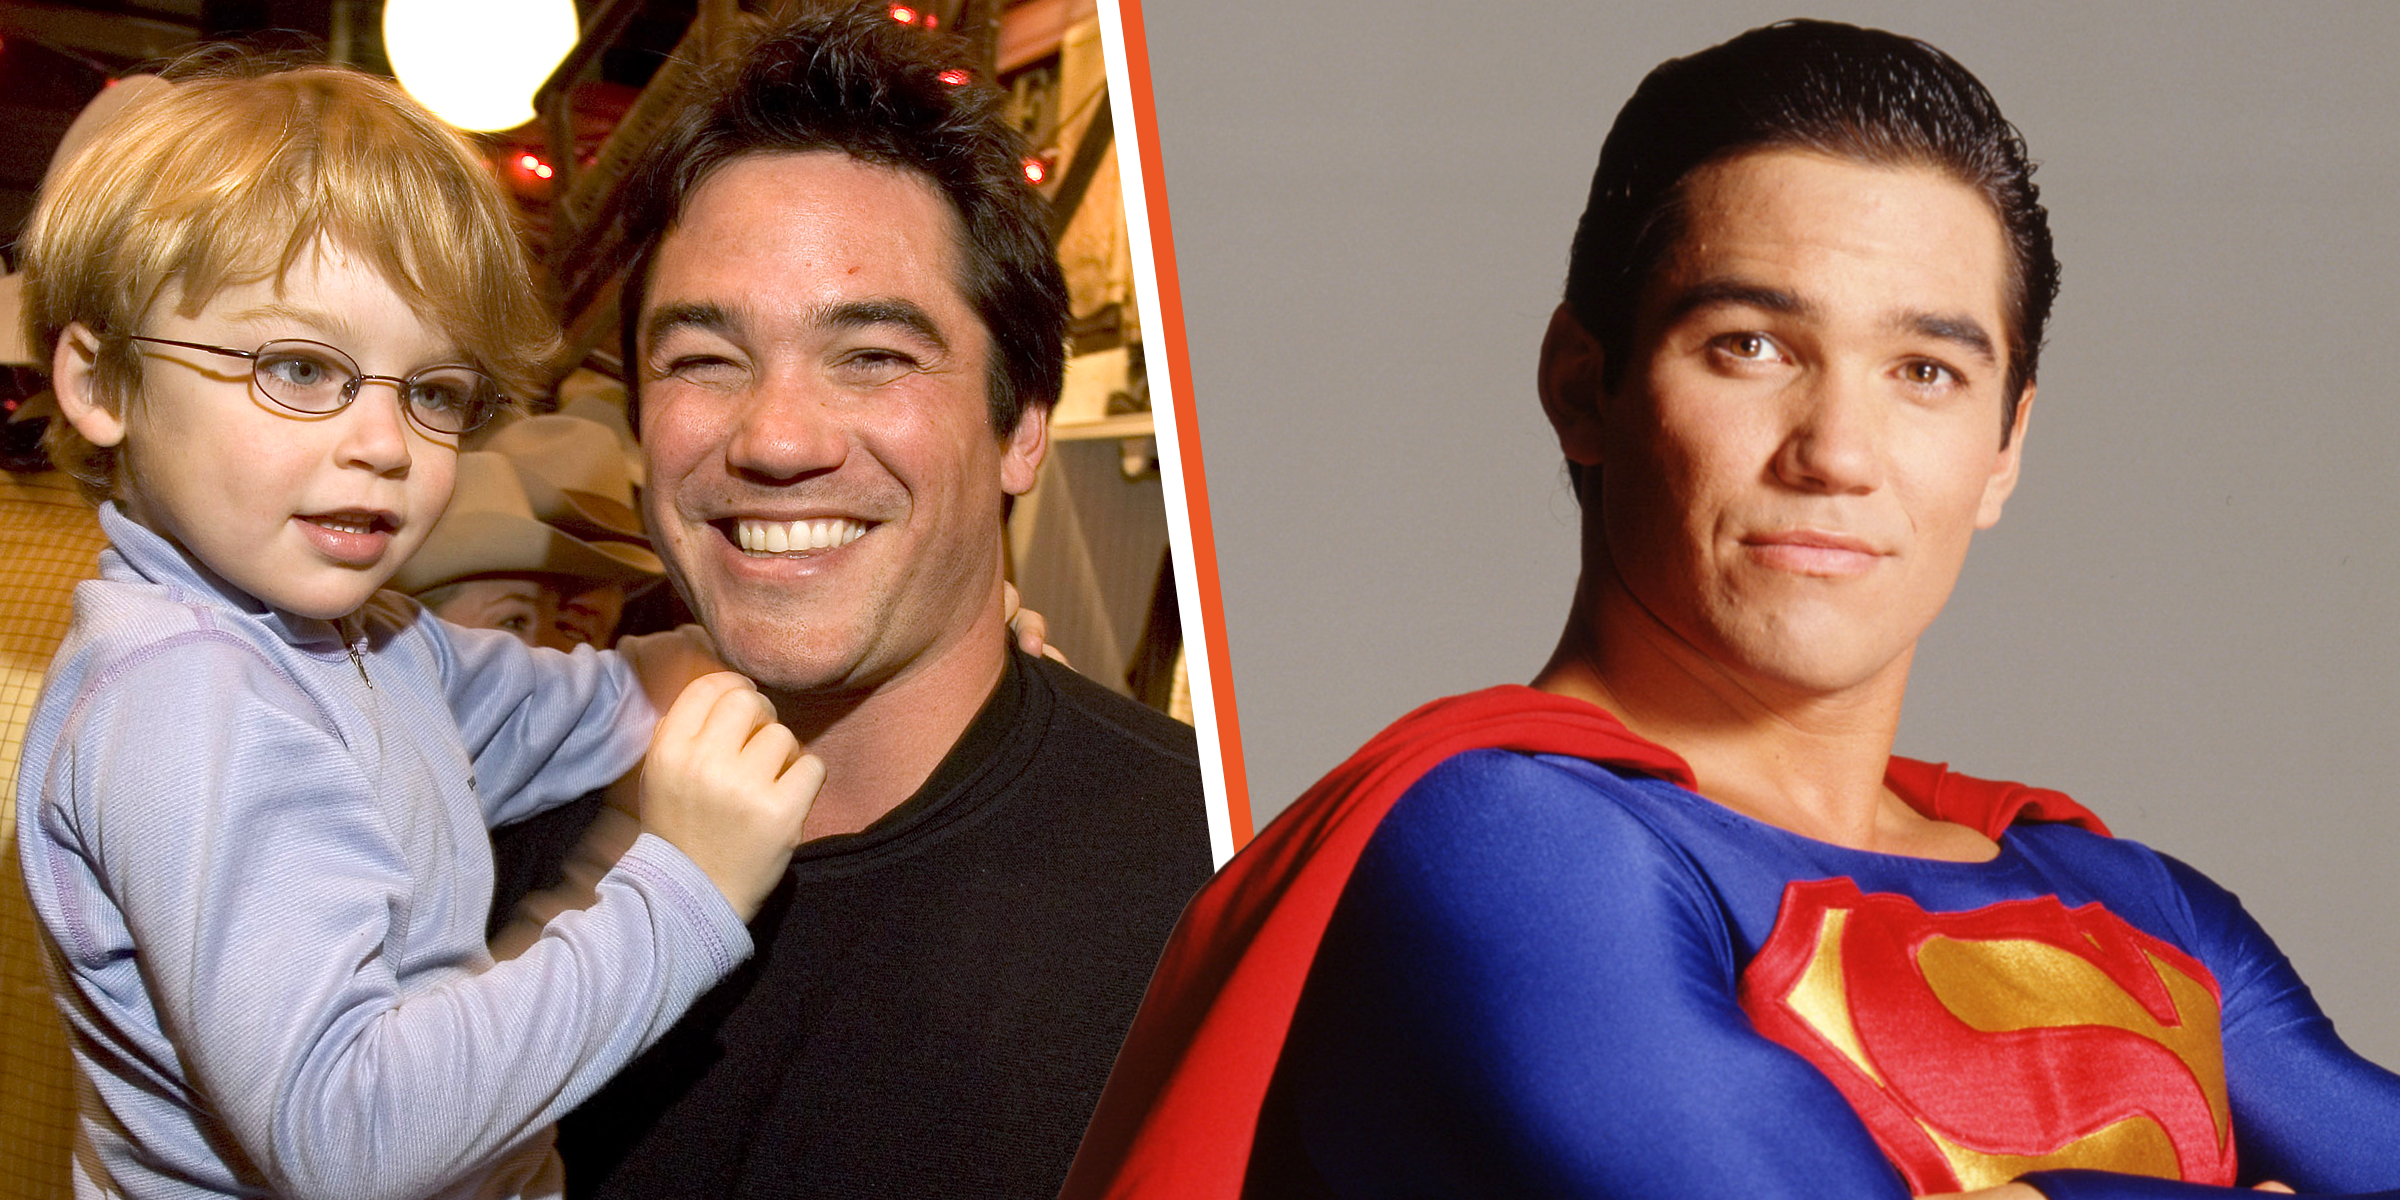 Christopher and Dean Cain | Dean Cain | Source: Getty Images